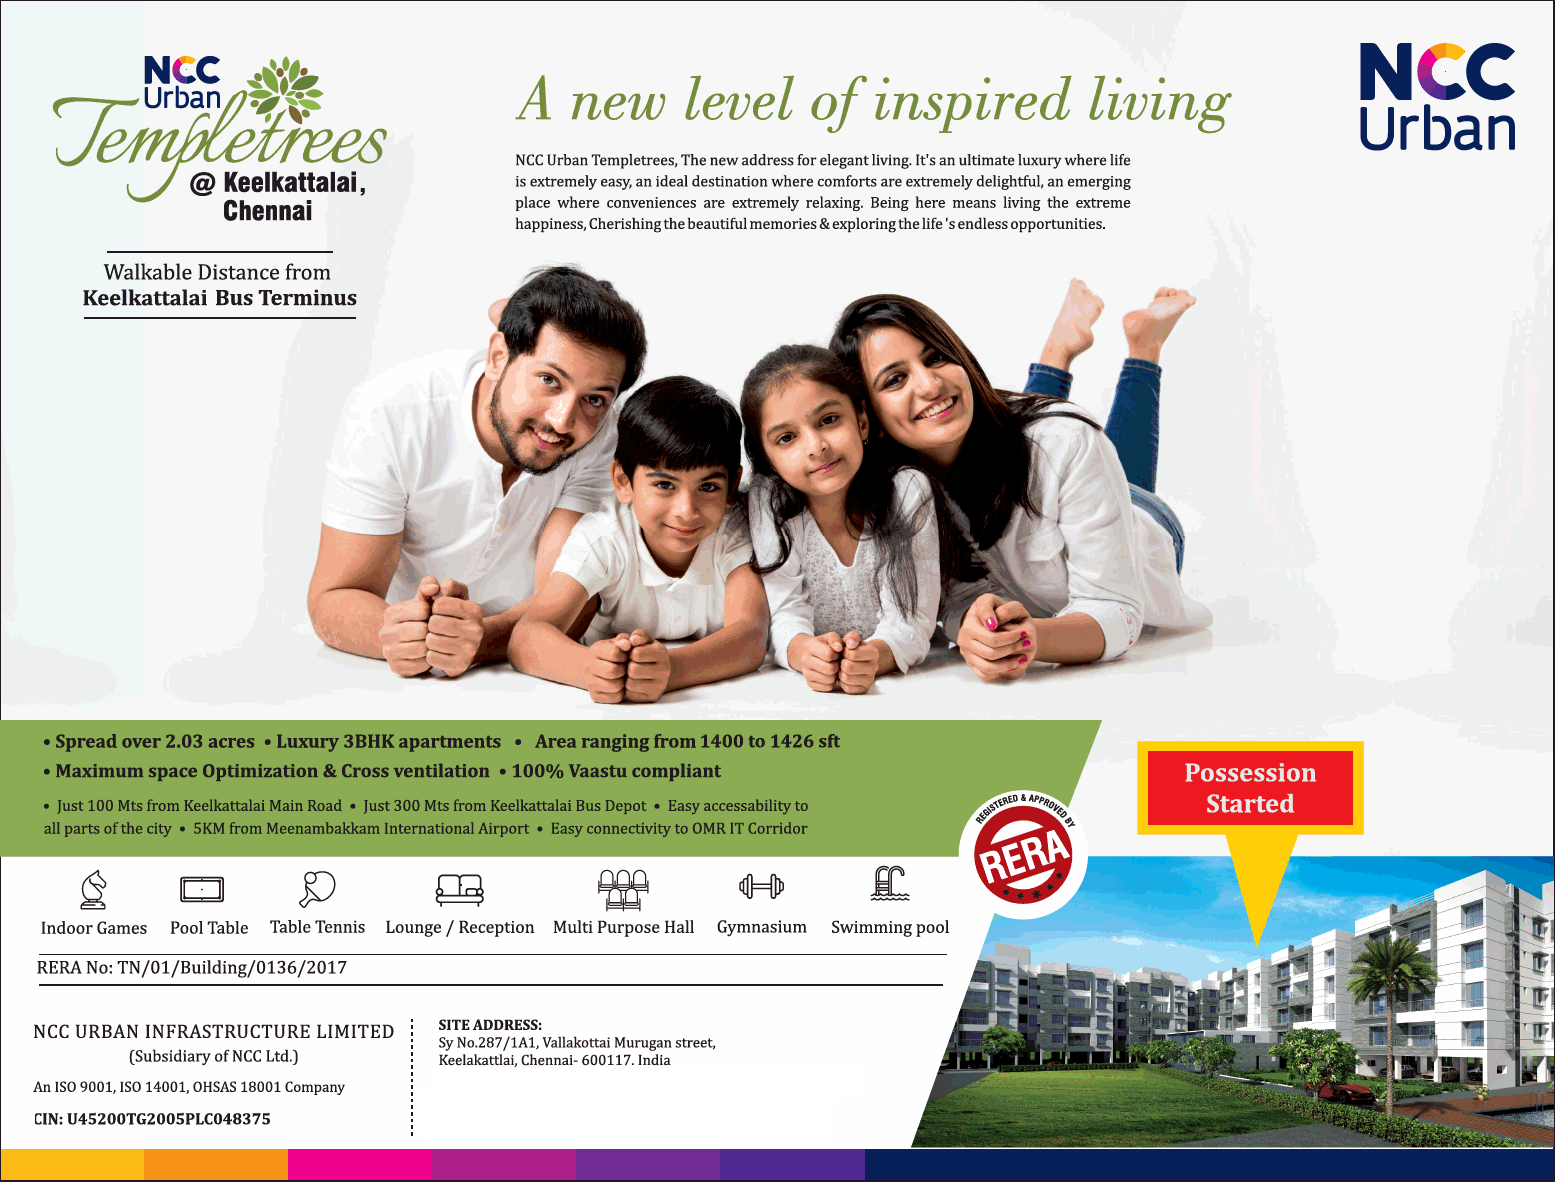 Presenting offer possession started at NCC Urban Temple Trees in Chennai Update